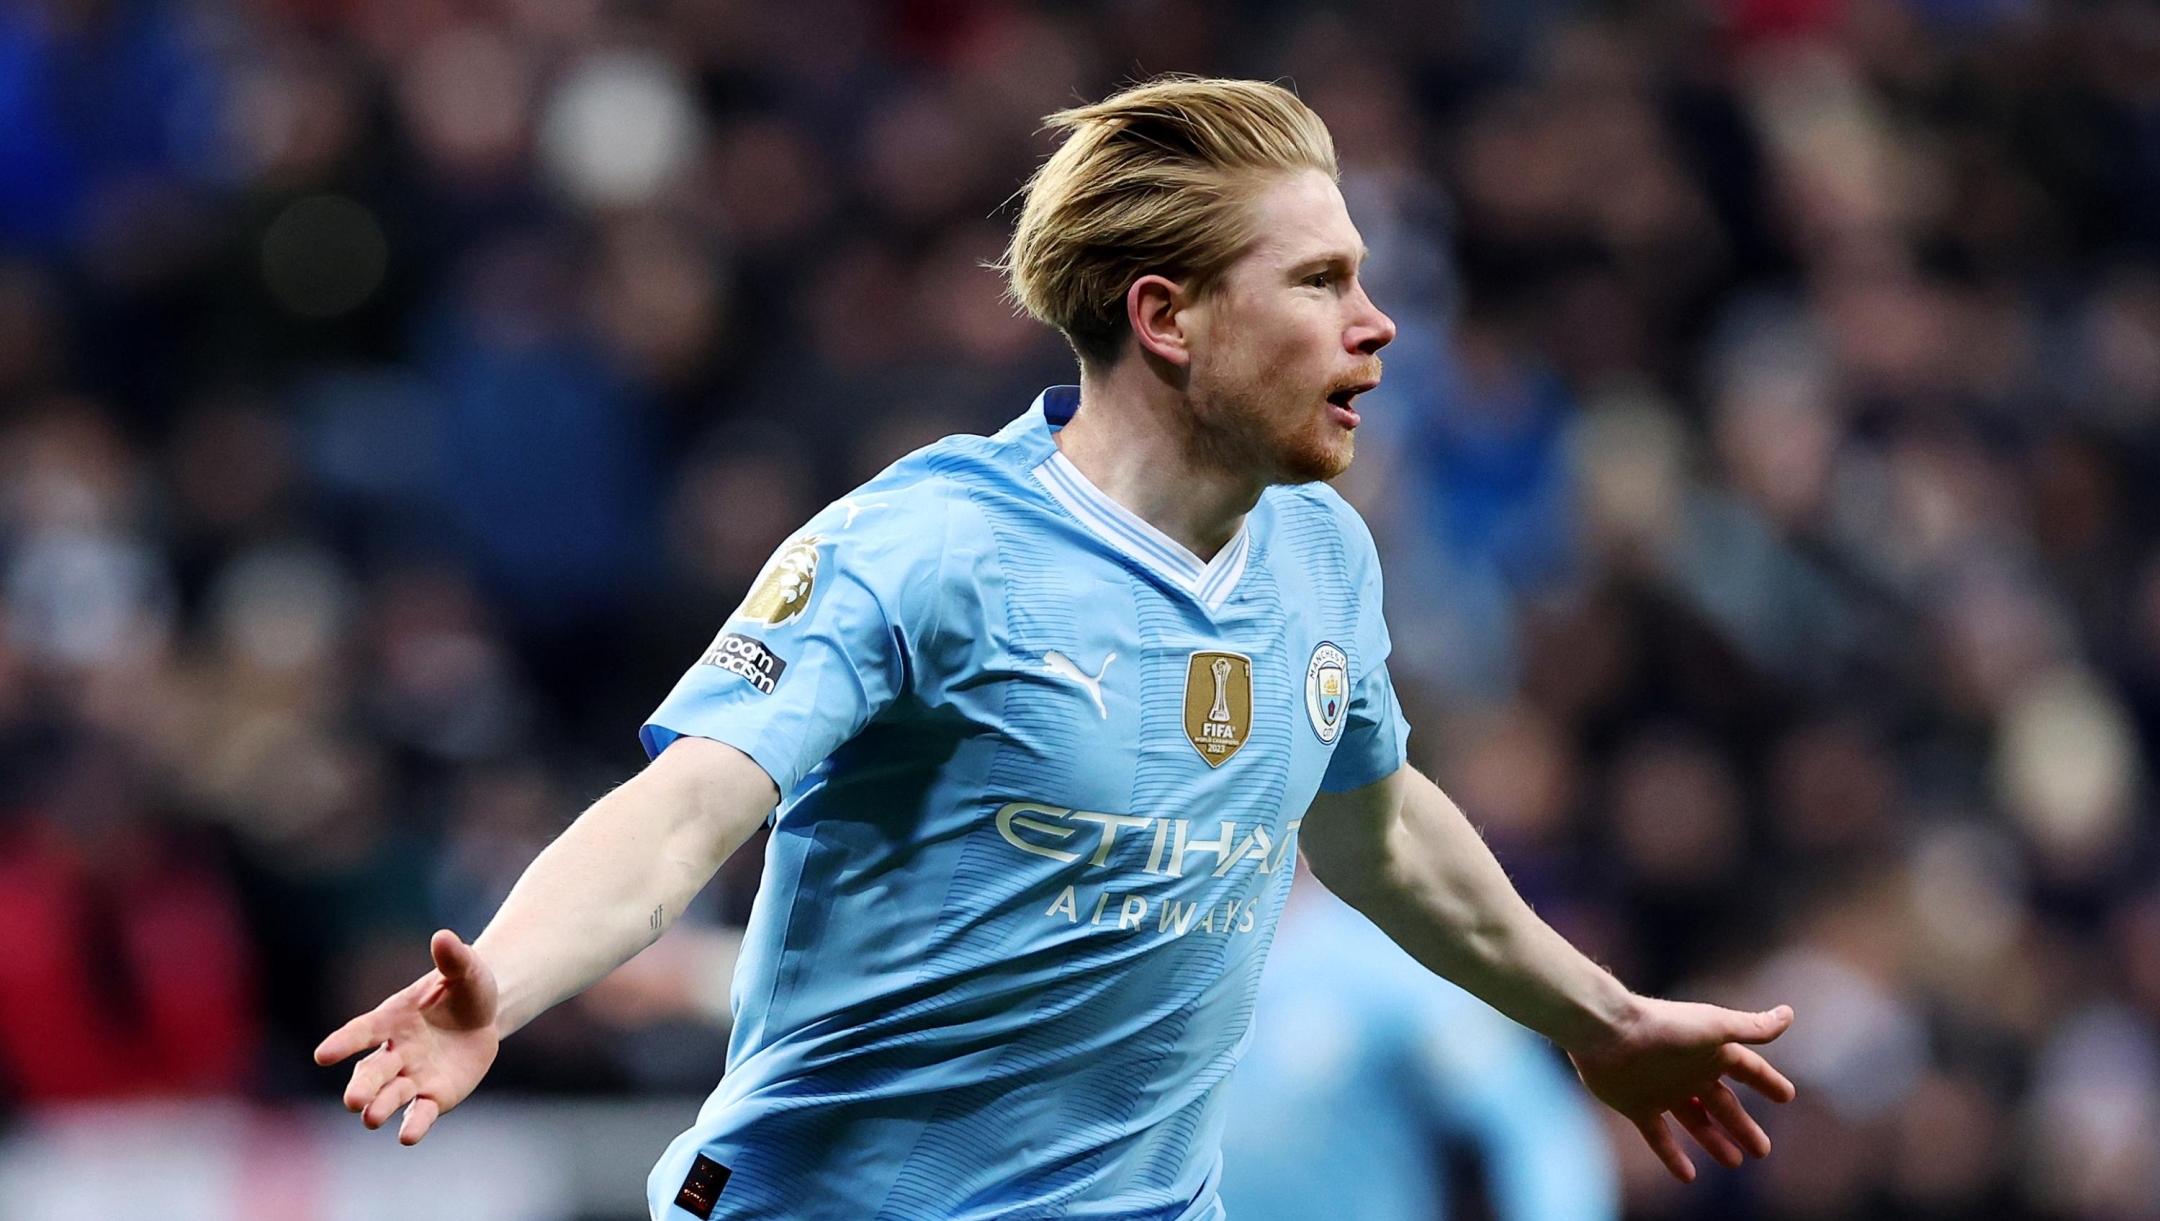 NEWCASTLE UPON TYNE, ENGLAND - JANUARY 13: Kevin De Bruyne of Manchester City celebrates scoring his team's second goal during the Premier League match between Newcastle United and Manchester City at St. James Park on January 13, 2024 in Newcastle upon Tyne, England. (Photo by Alex Livesey/Getty Images)